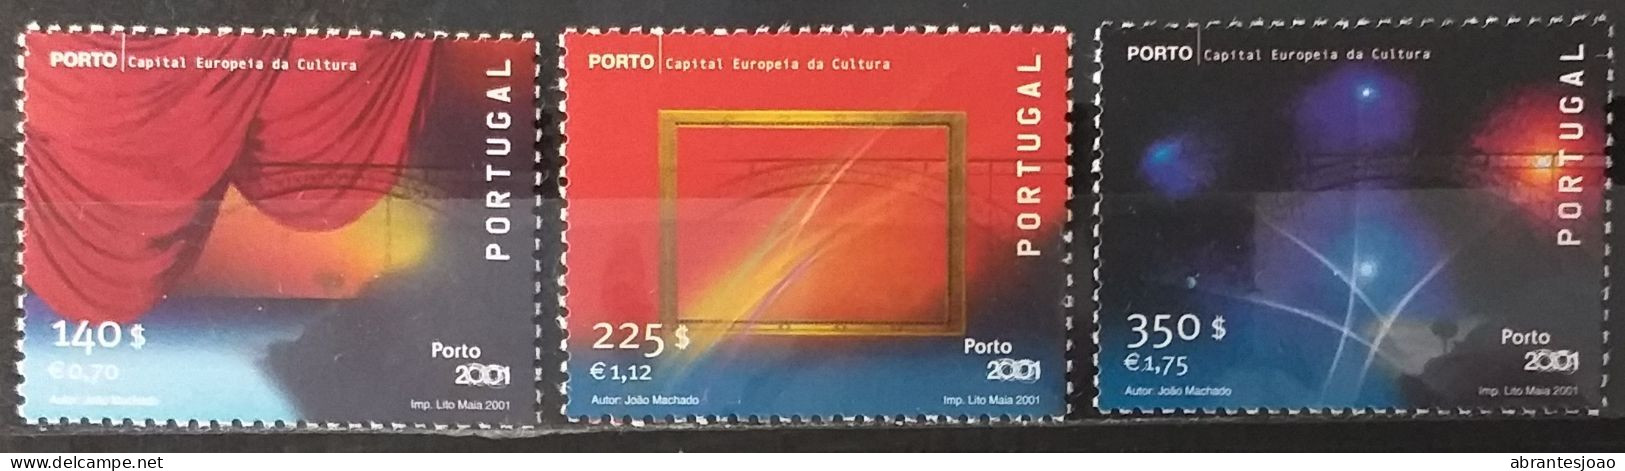 2001 - Portugal - MNH - Porto 2001 European Capital Of Culture - 6 Stamps - Unused Stamps